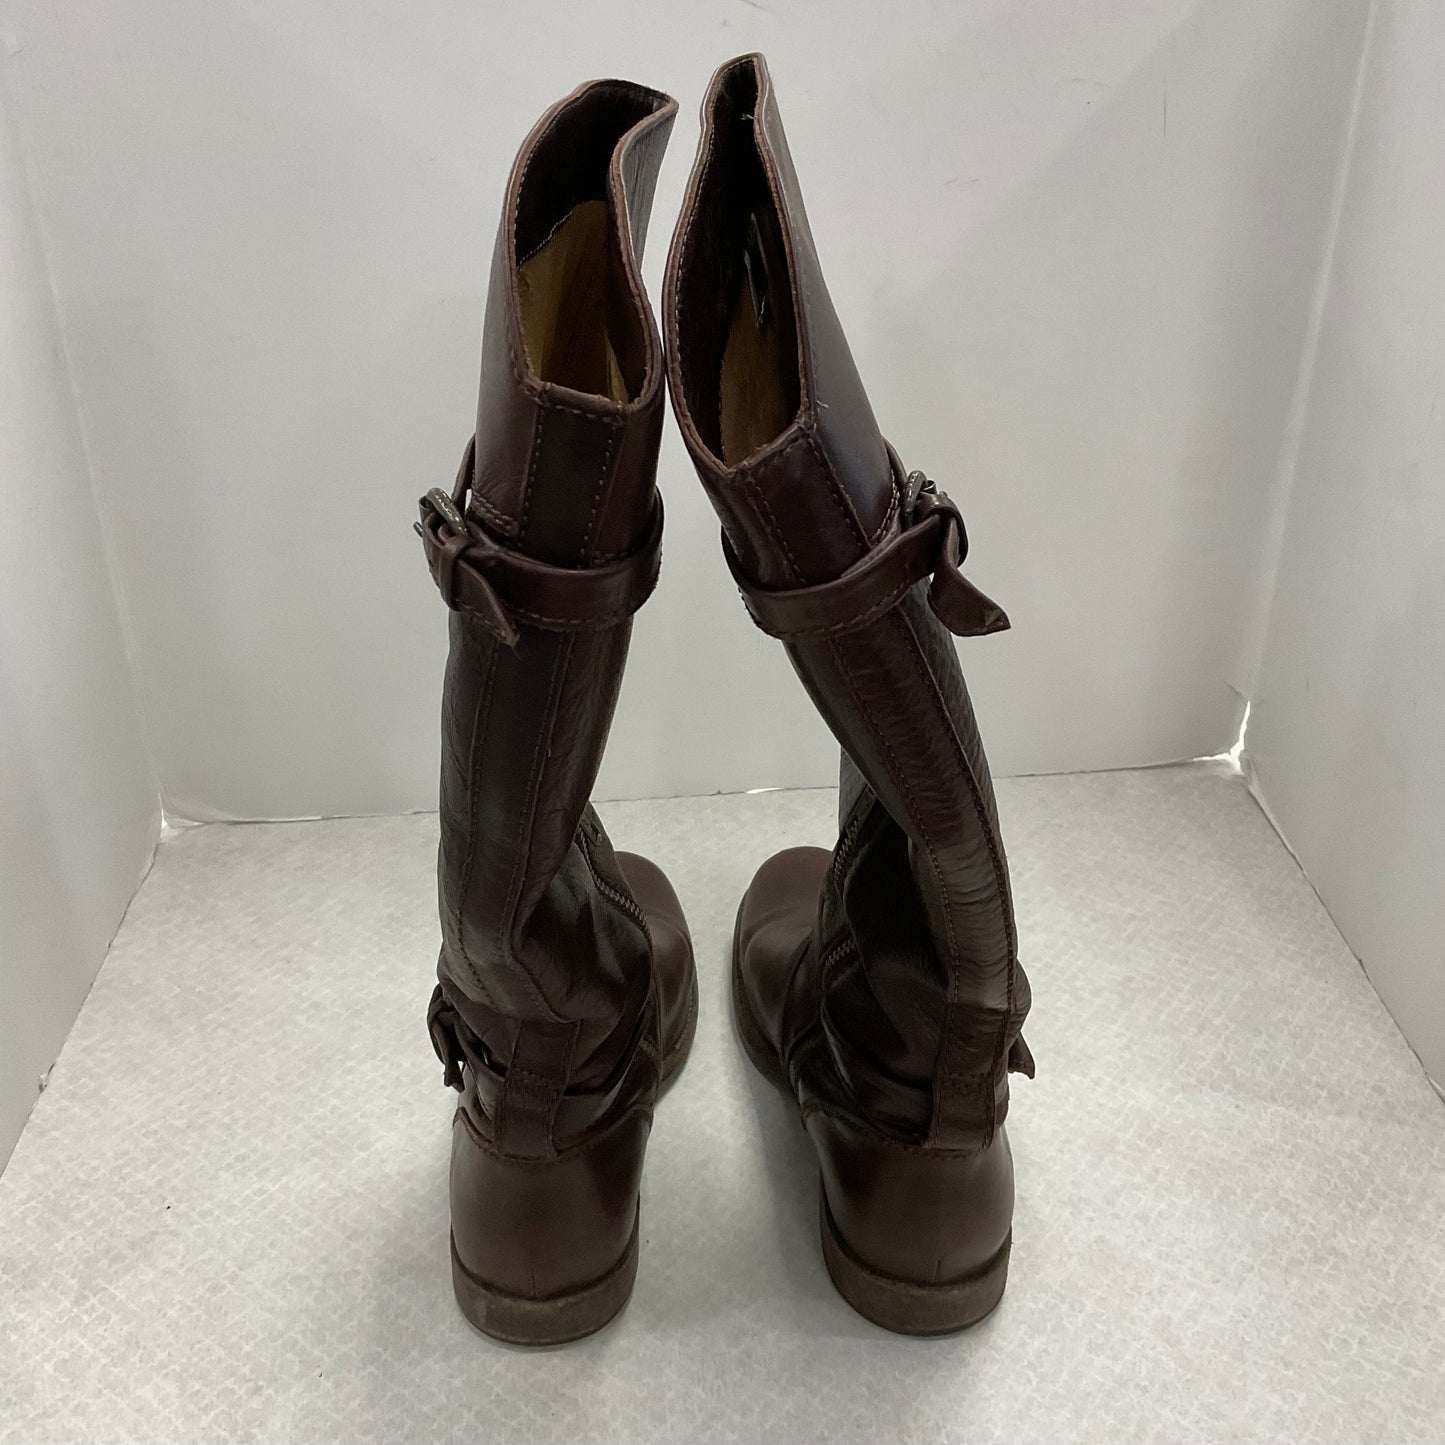 Boots Knee Flats By Frye  Size: 8.5